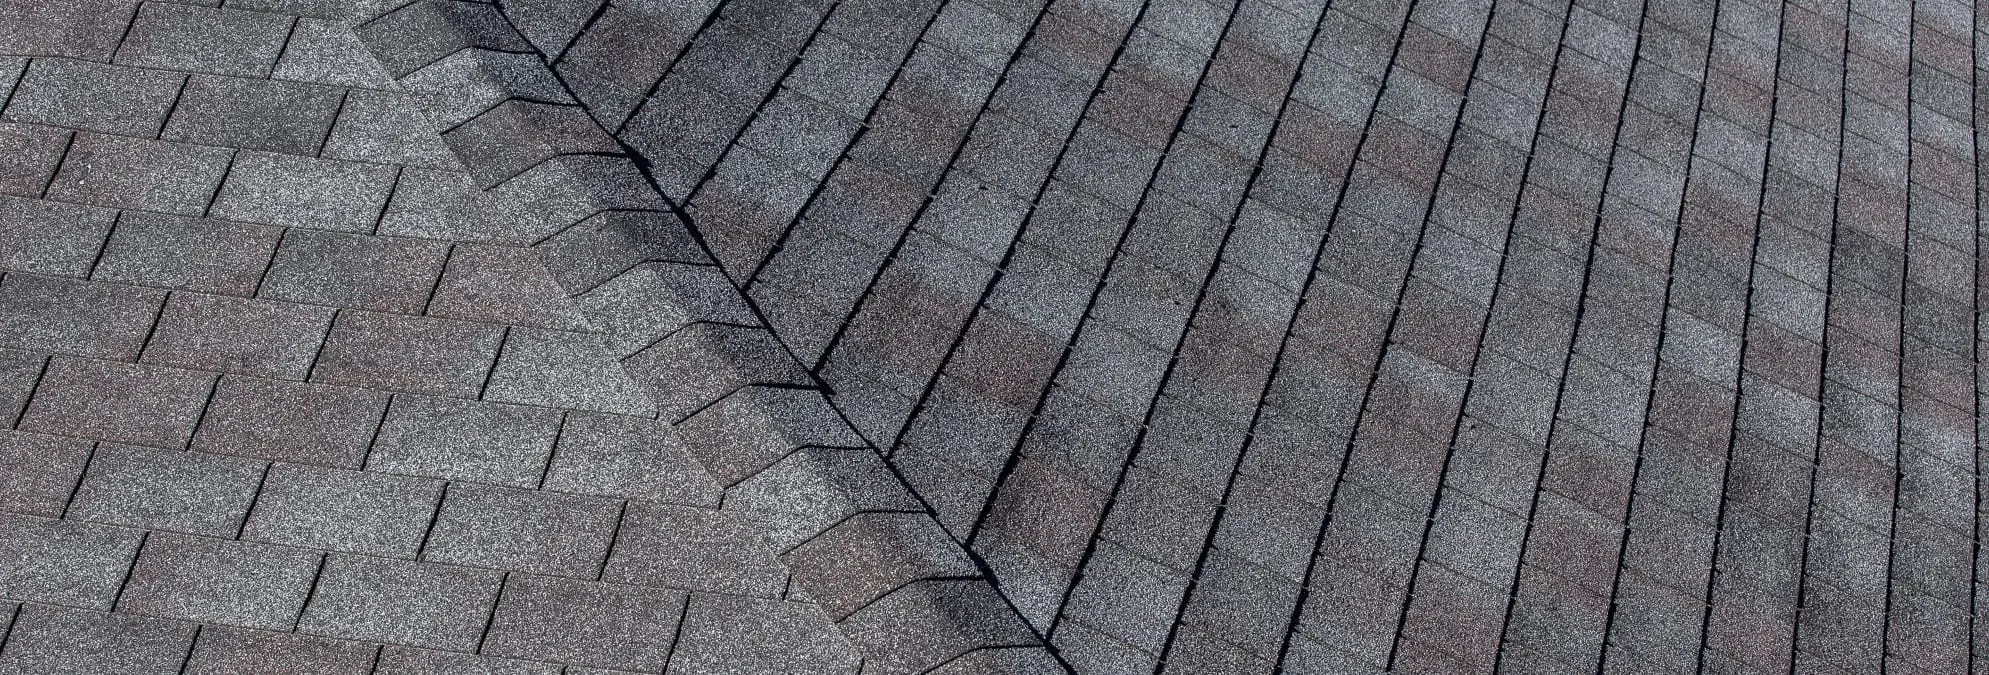 How Much Does Asphalt Roofing Cost in Houston, TX?